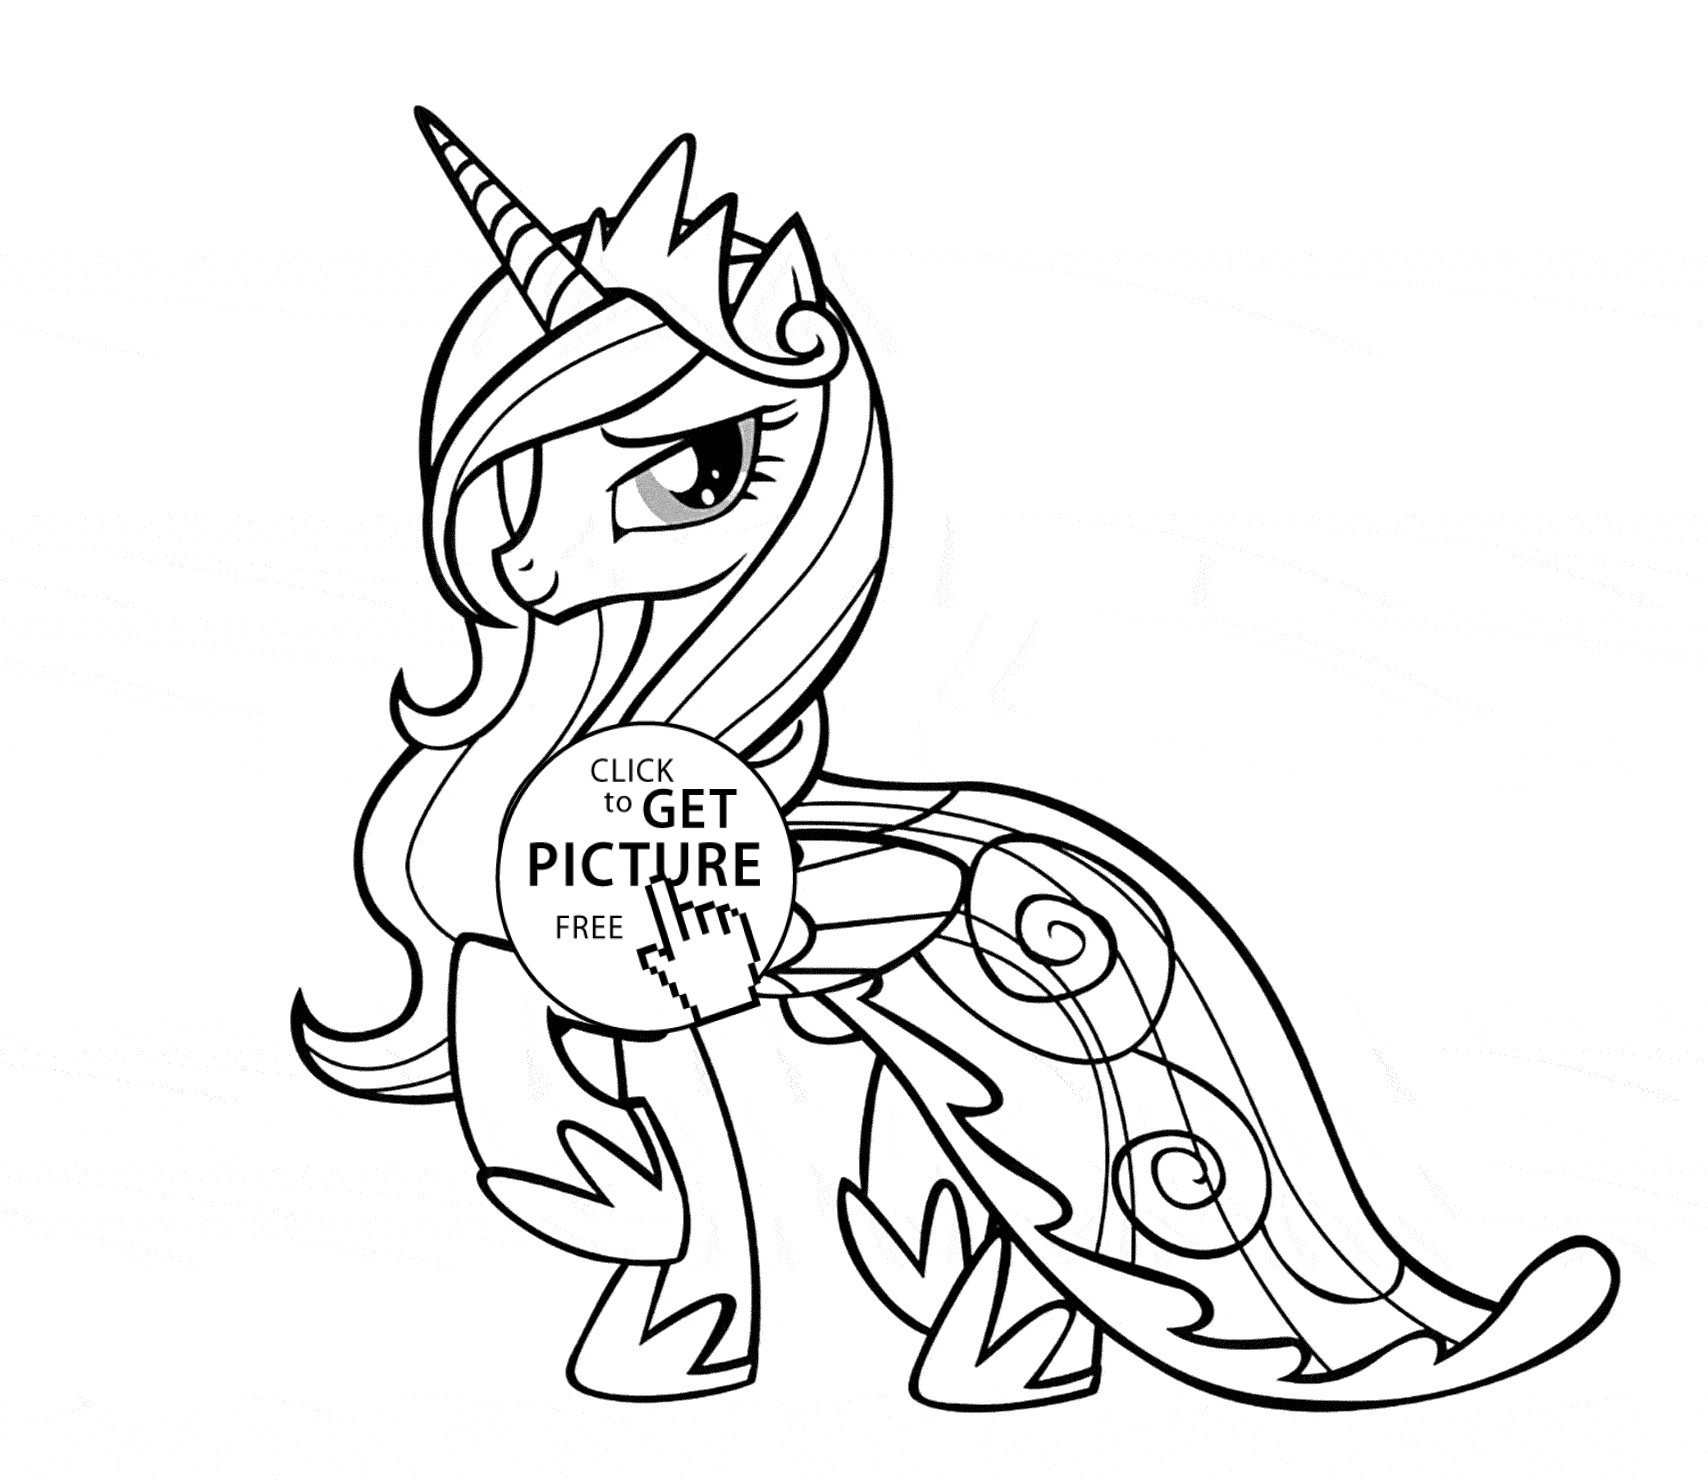 Coloring Pages For Girls Mouted Princess
 Princess Luna My little pony coloring page for kids for